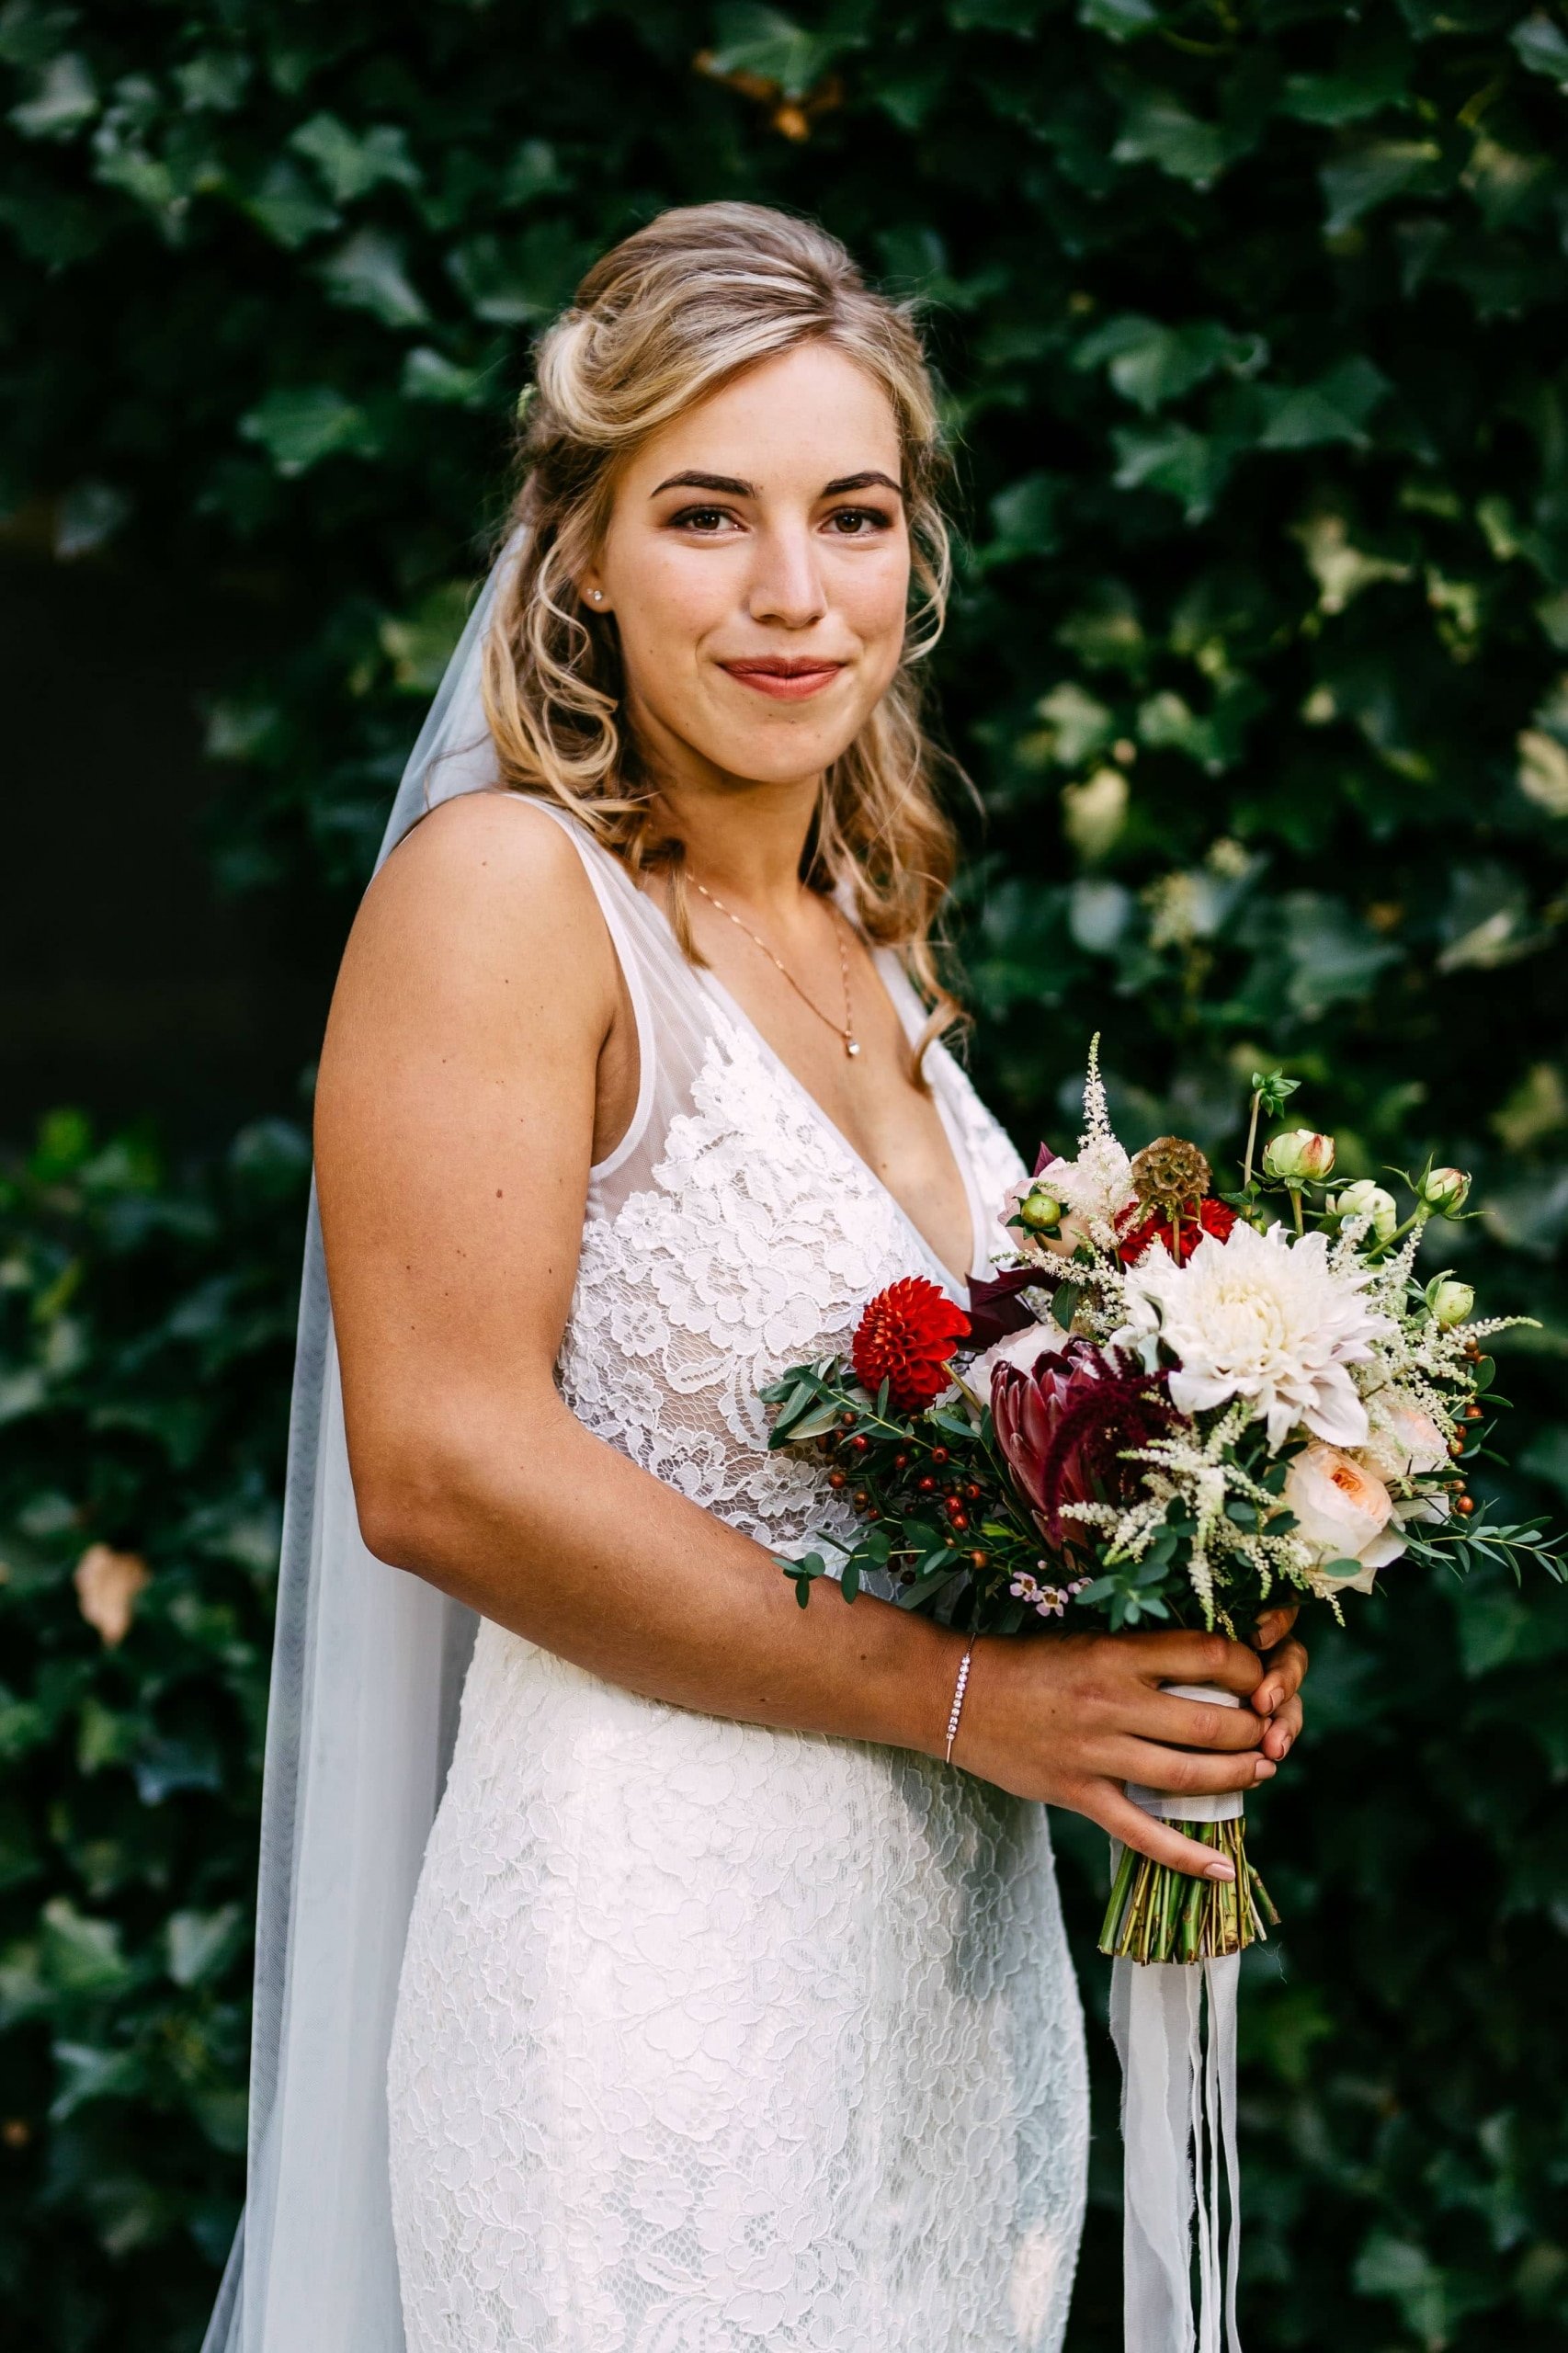 A bride in a lace wedding dress with a bouquet.